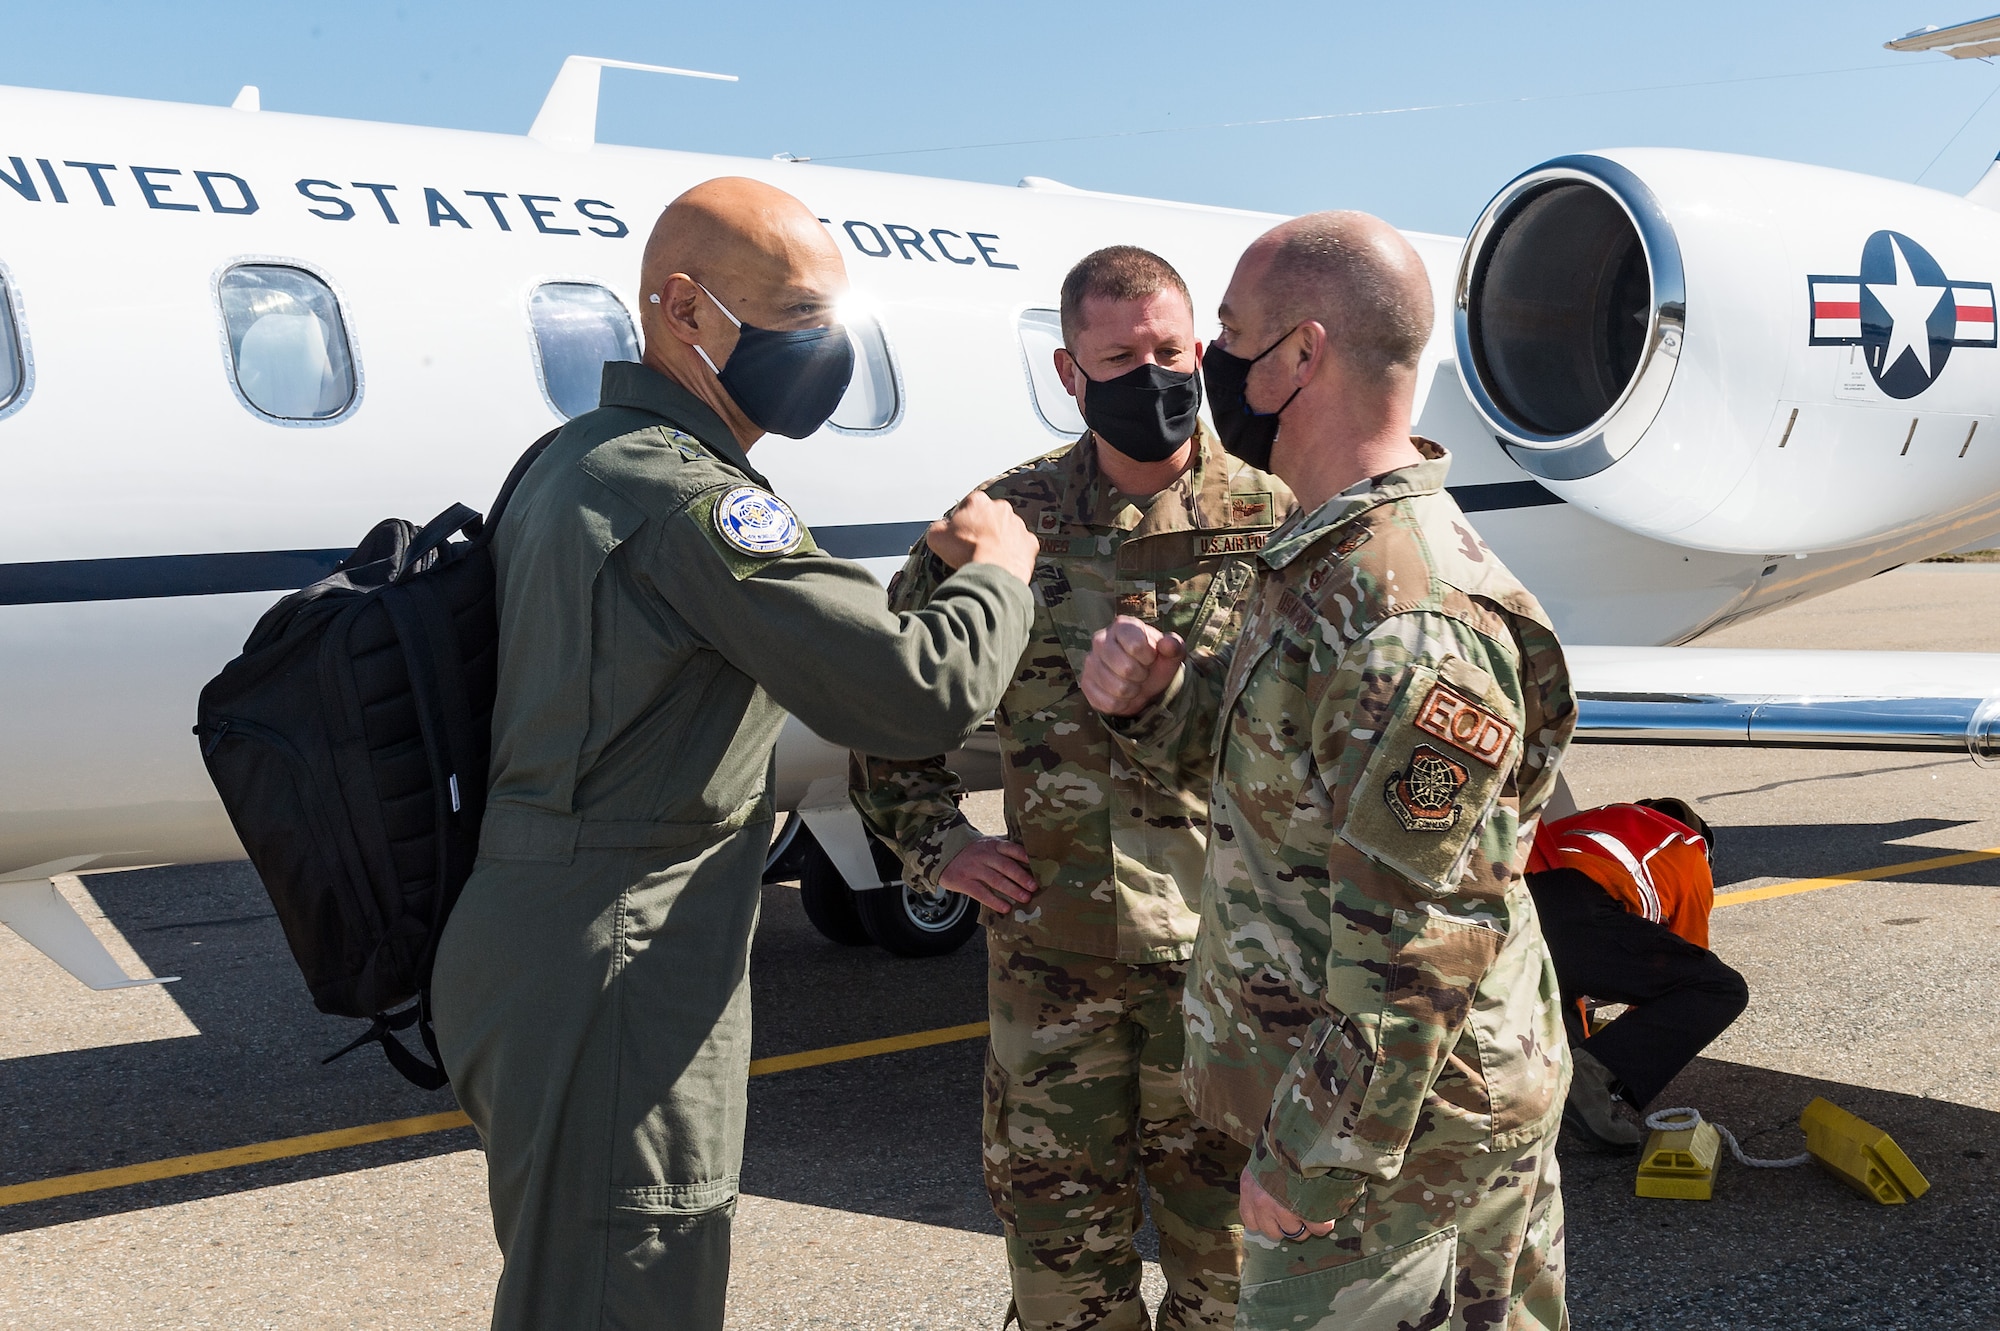 Lt. Gen. Brian Robinson, Air Mobility Command deputy commander, left, greets Chief Master Sgt. Jeremiah Grisham, 436th Airlift Wing interim command chief, at Dover Air Force Base, Delaware, March 22, 2021. Robinson came to Dover AFB to engage with base leaders and fulfill training requirements. (U.S. Air Force photo by Roland Balik)